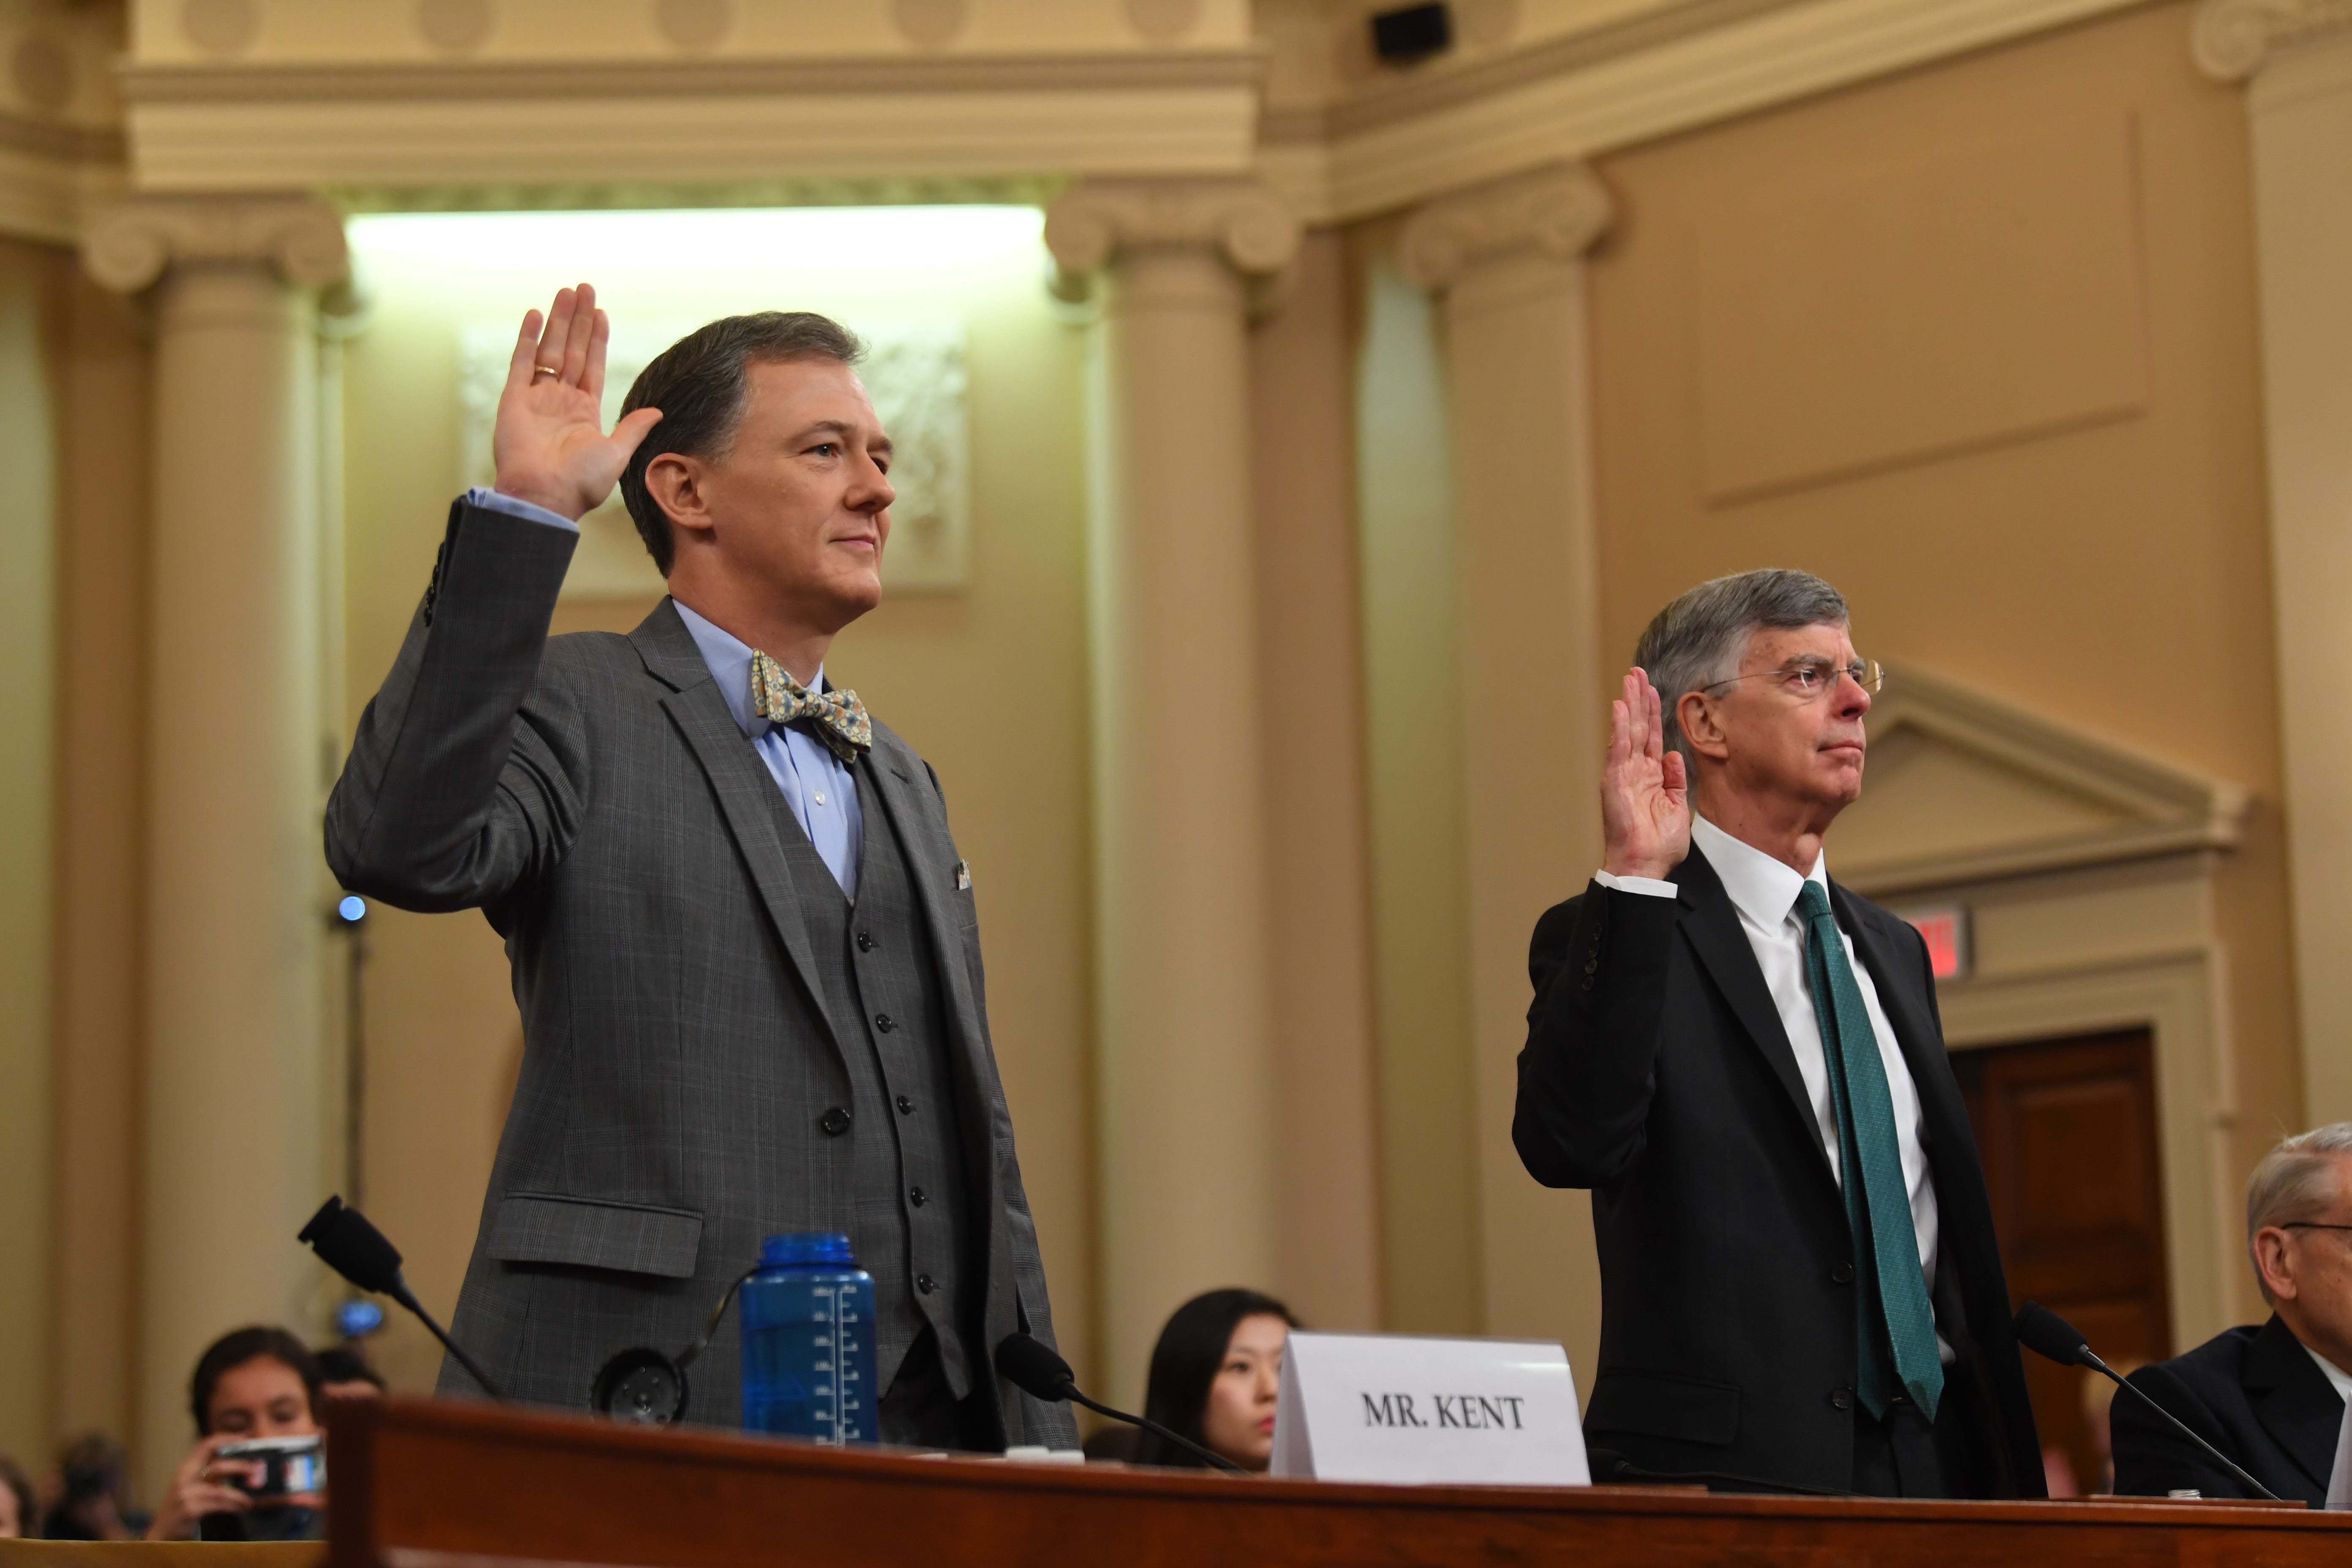 Kent and Taylor in the hearing room, raising their right hands to be sworn in.